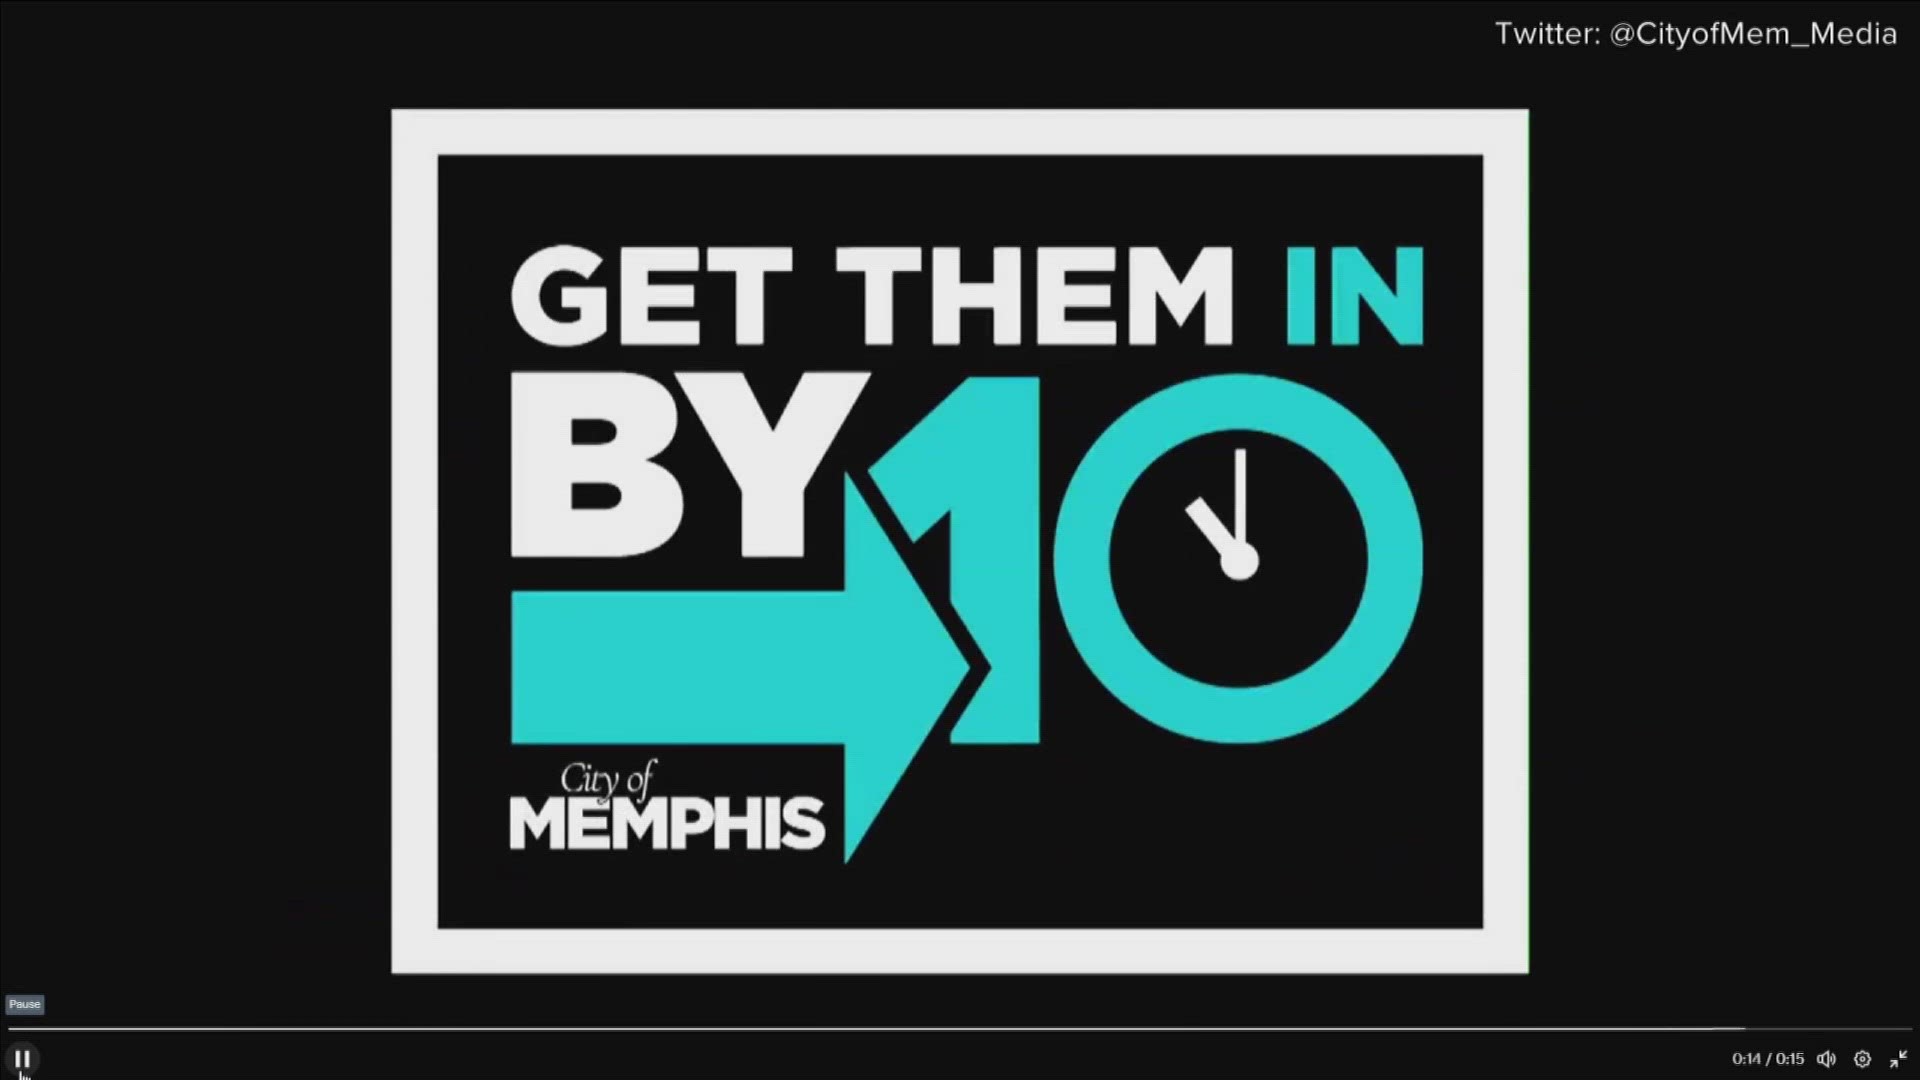 In a new public service campaign, the city of Memphis is asking parents to be part of the solution during summer break and have youth home by 10 p.m.